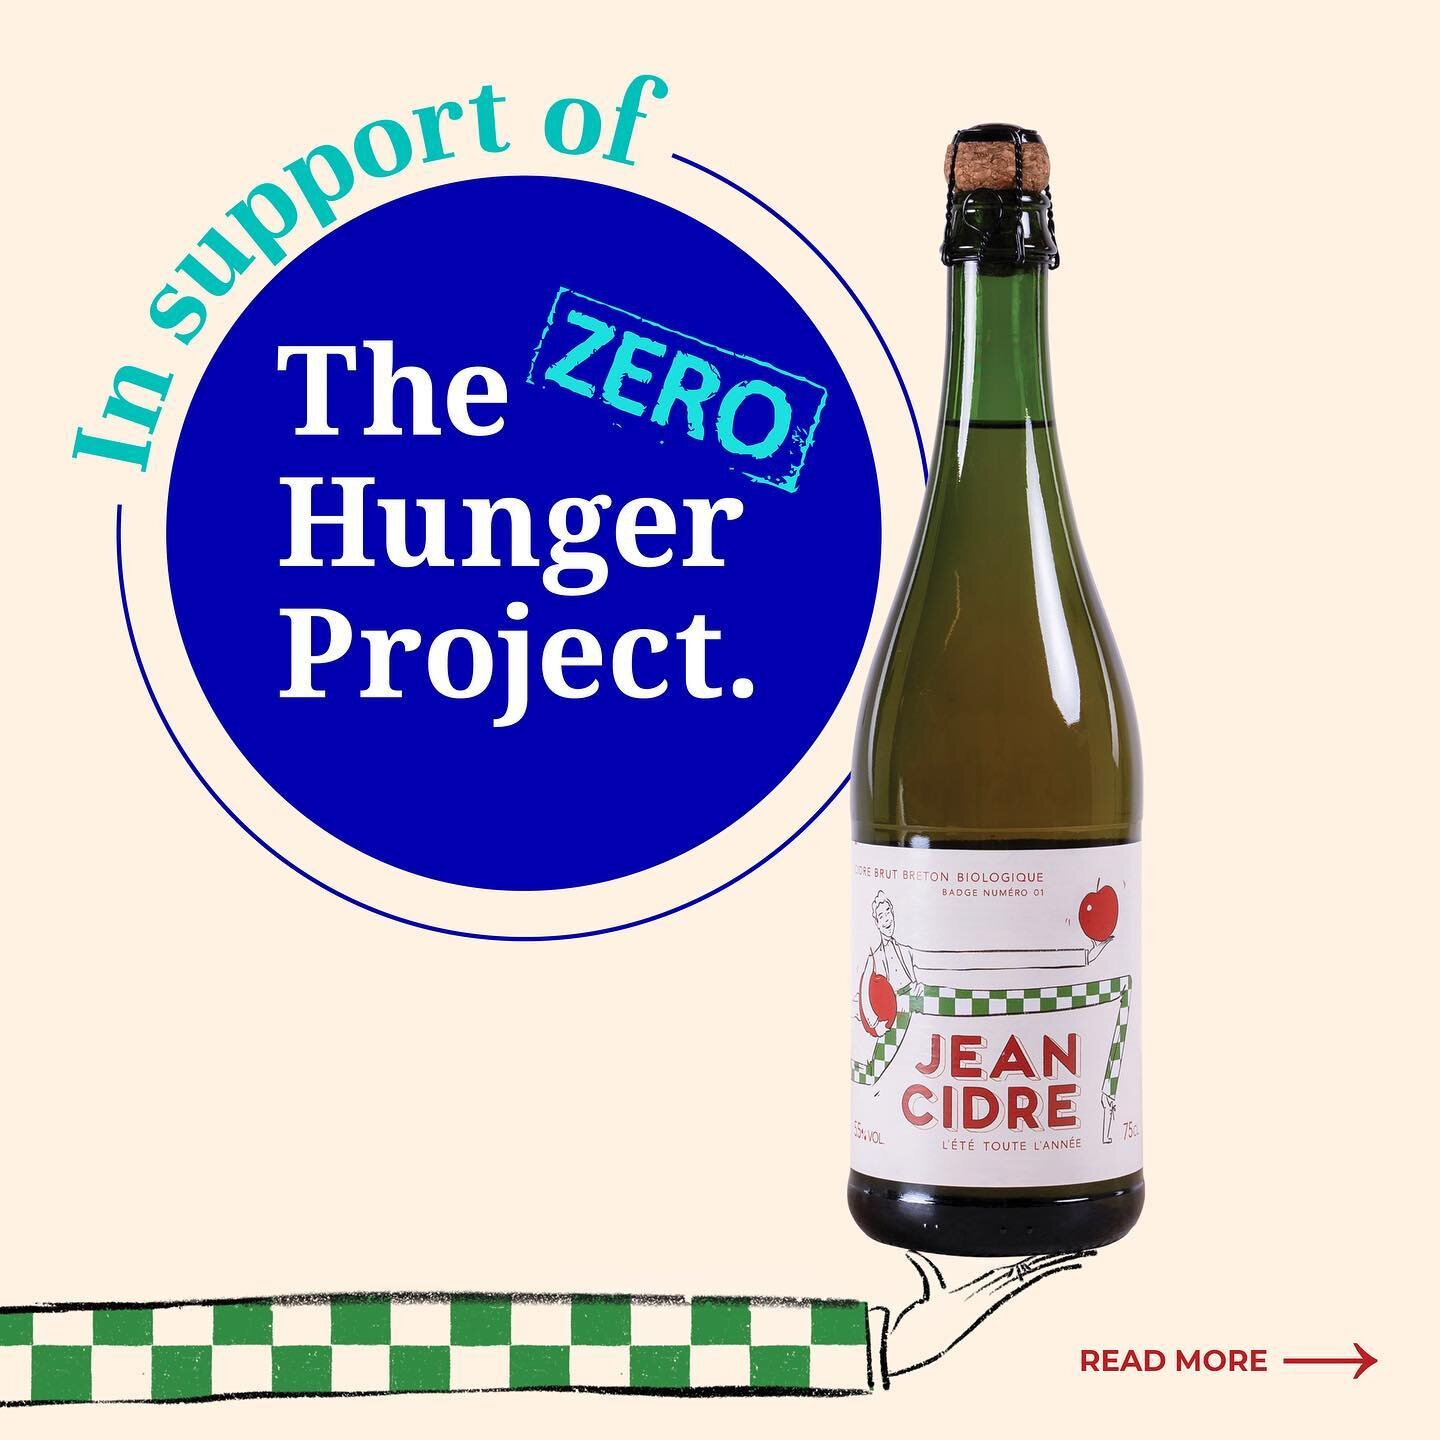 It&rsquo;s with great honor to mention that, as of 01-01-&rsquo;23, Jean Cidre is officially partnering with @thehungerprojectnl. Although enormous progress has been made in recent years, up to 828 million people still live with chronic hunger today.